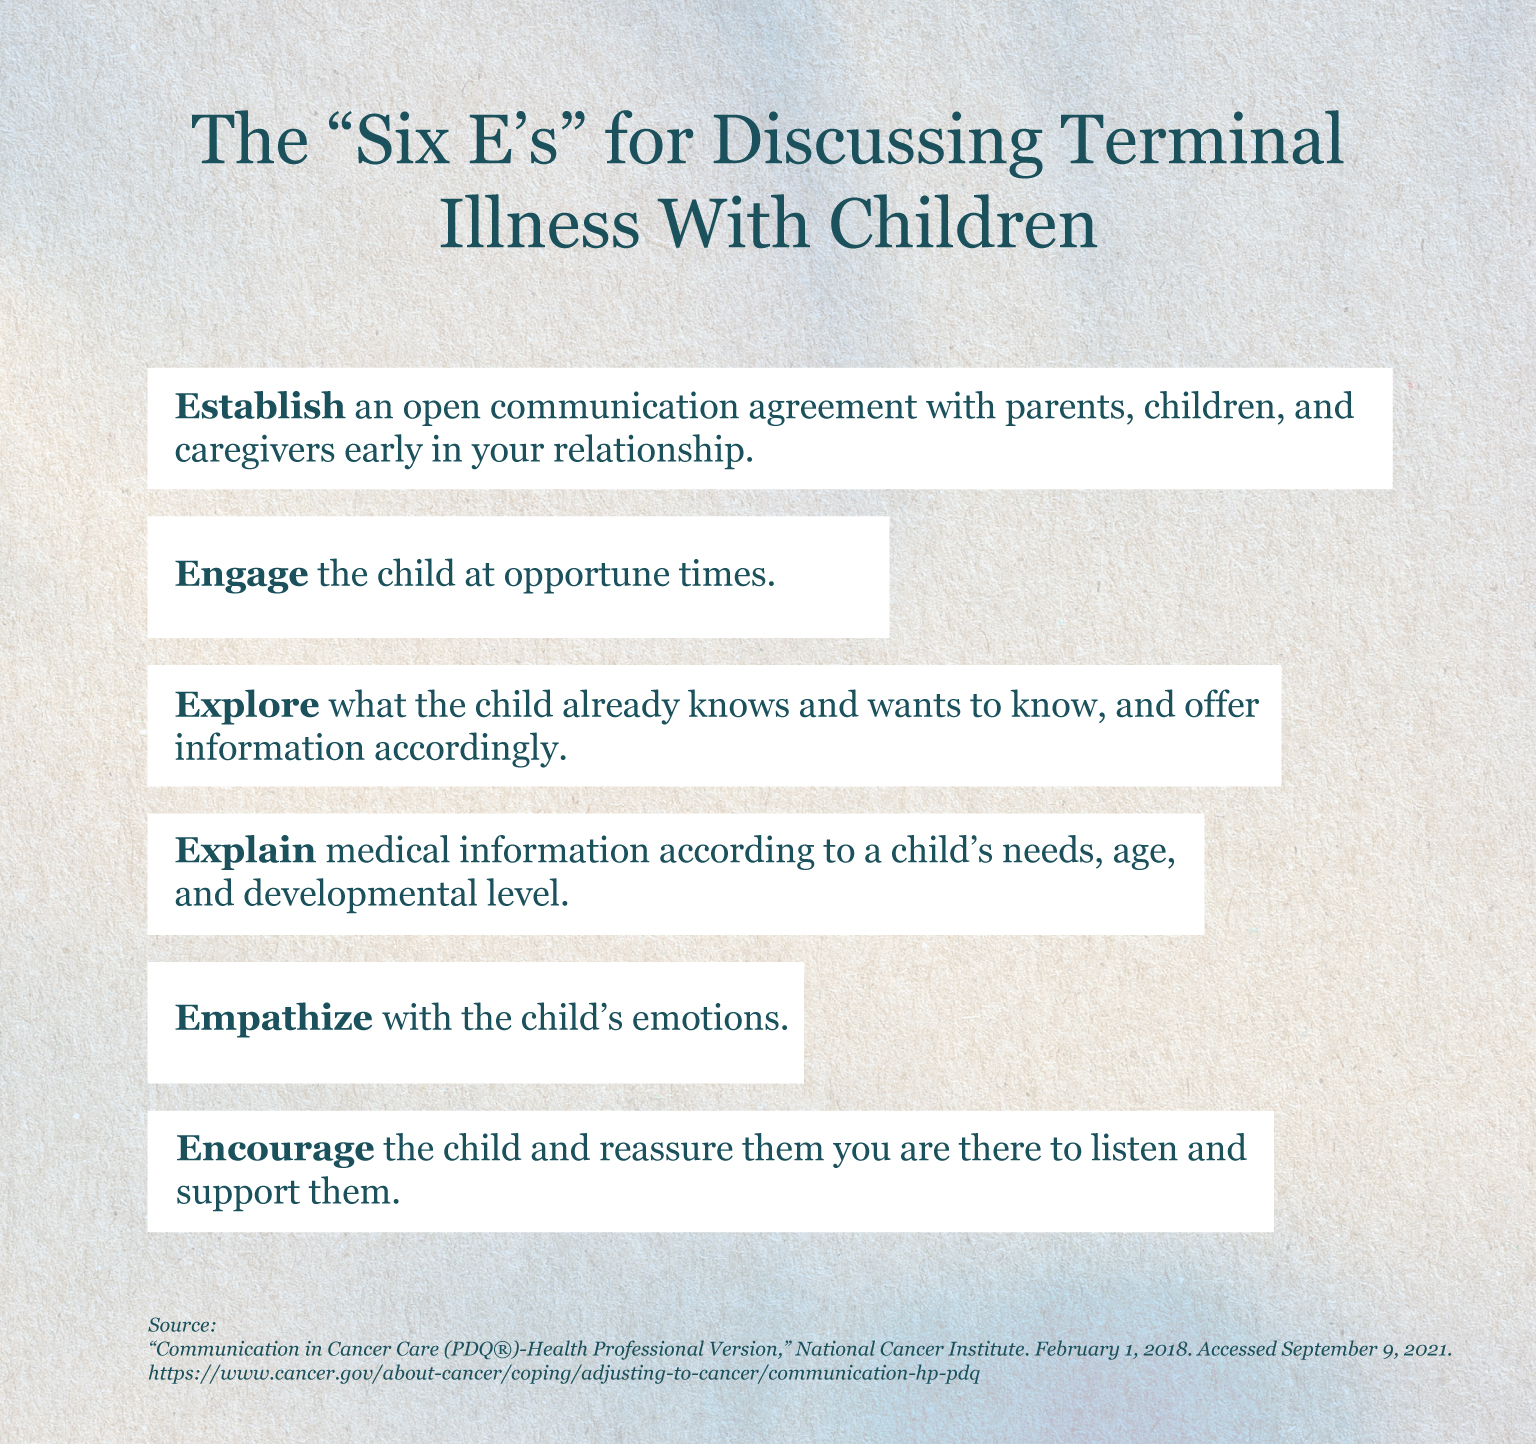 The “Six E’s” are guidelines for pediatric health care providers to engage with young patients with terminal illnesses and their families.